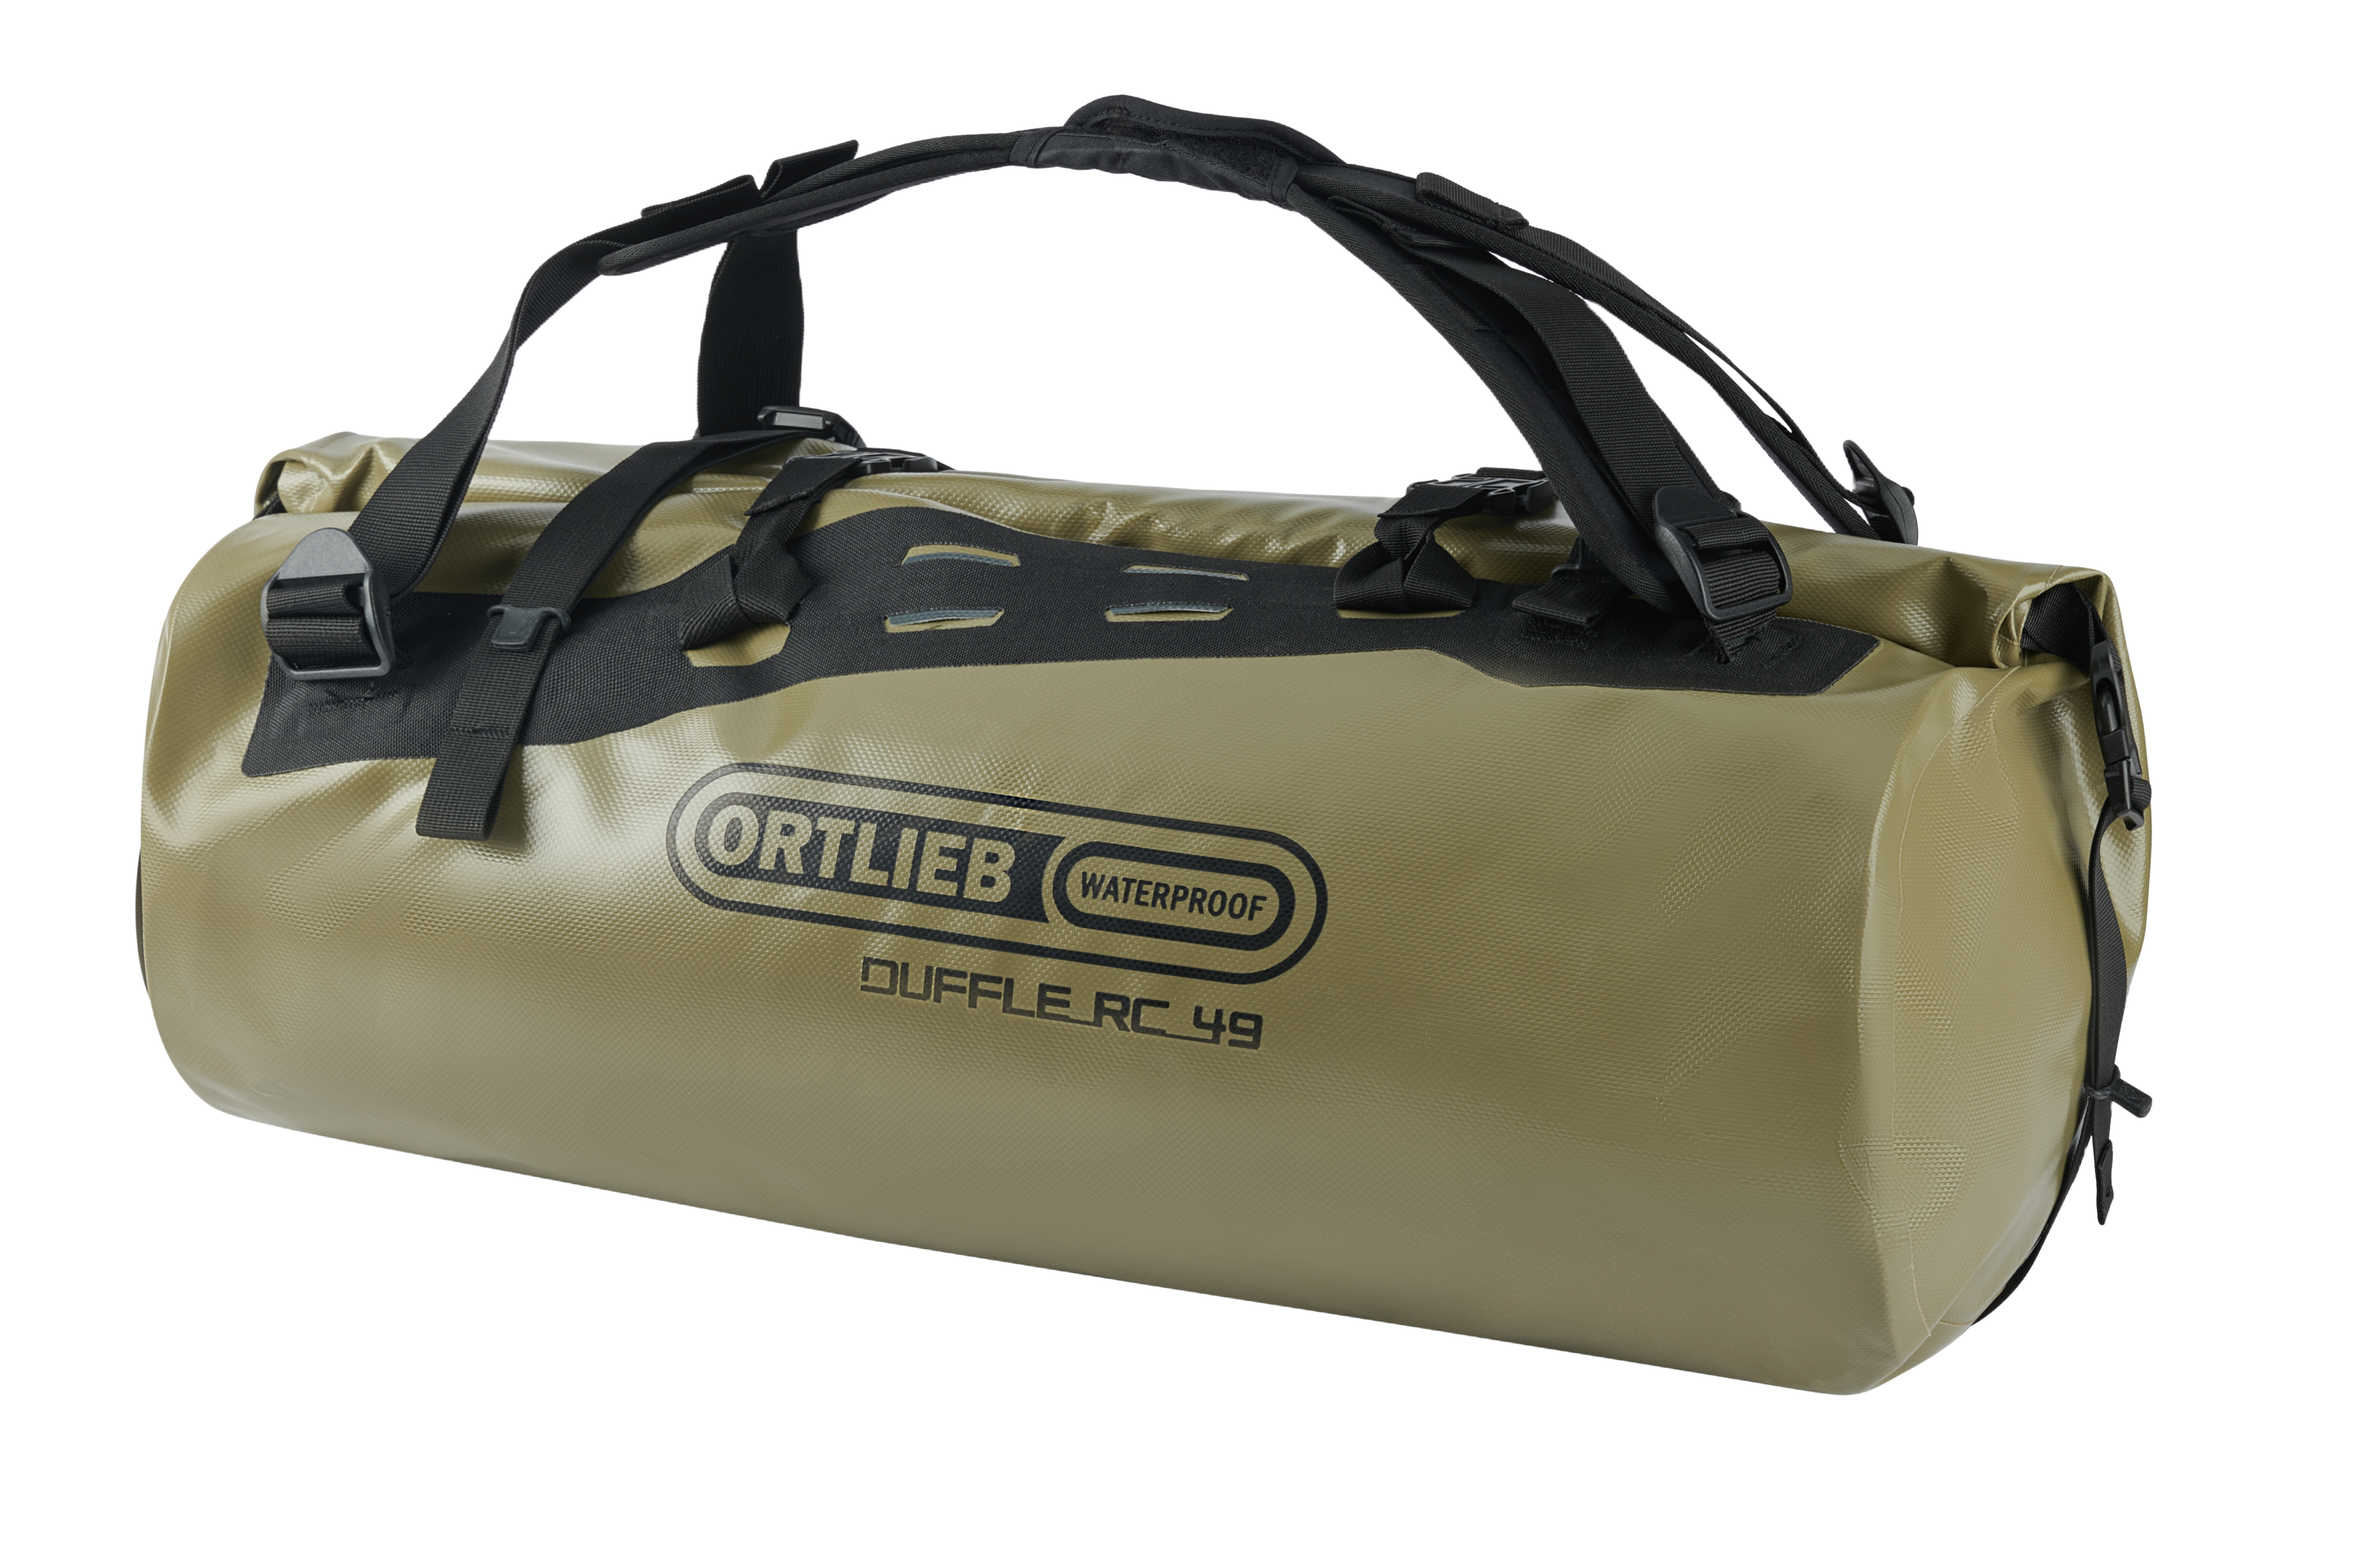 ORTLIEB Duffle RC olive - For Family Reisen Verlosung - ©ORTLIEB